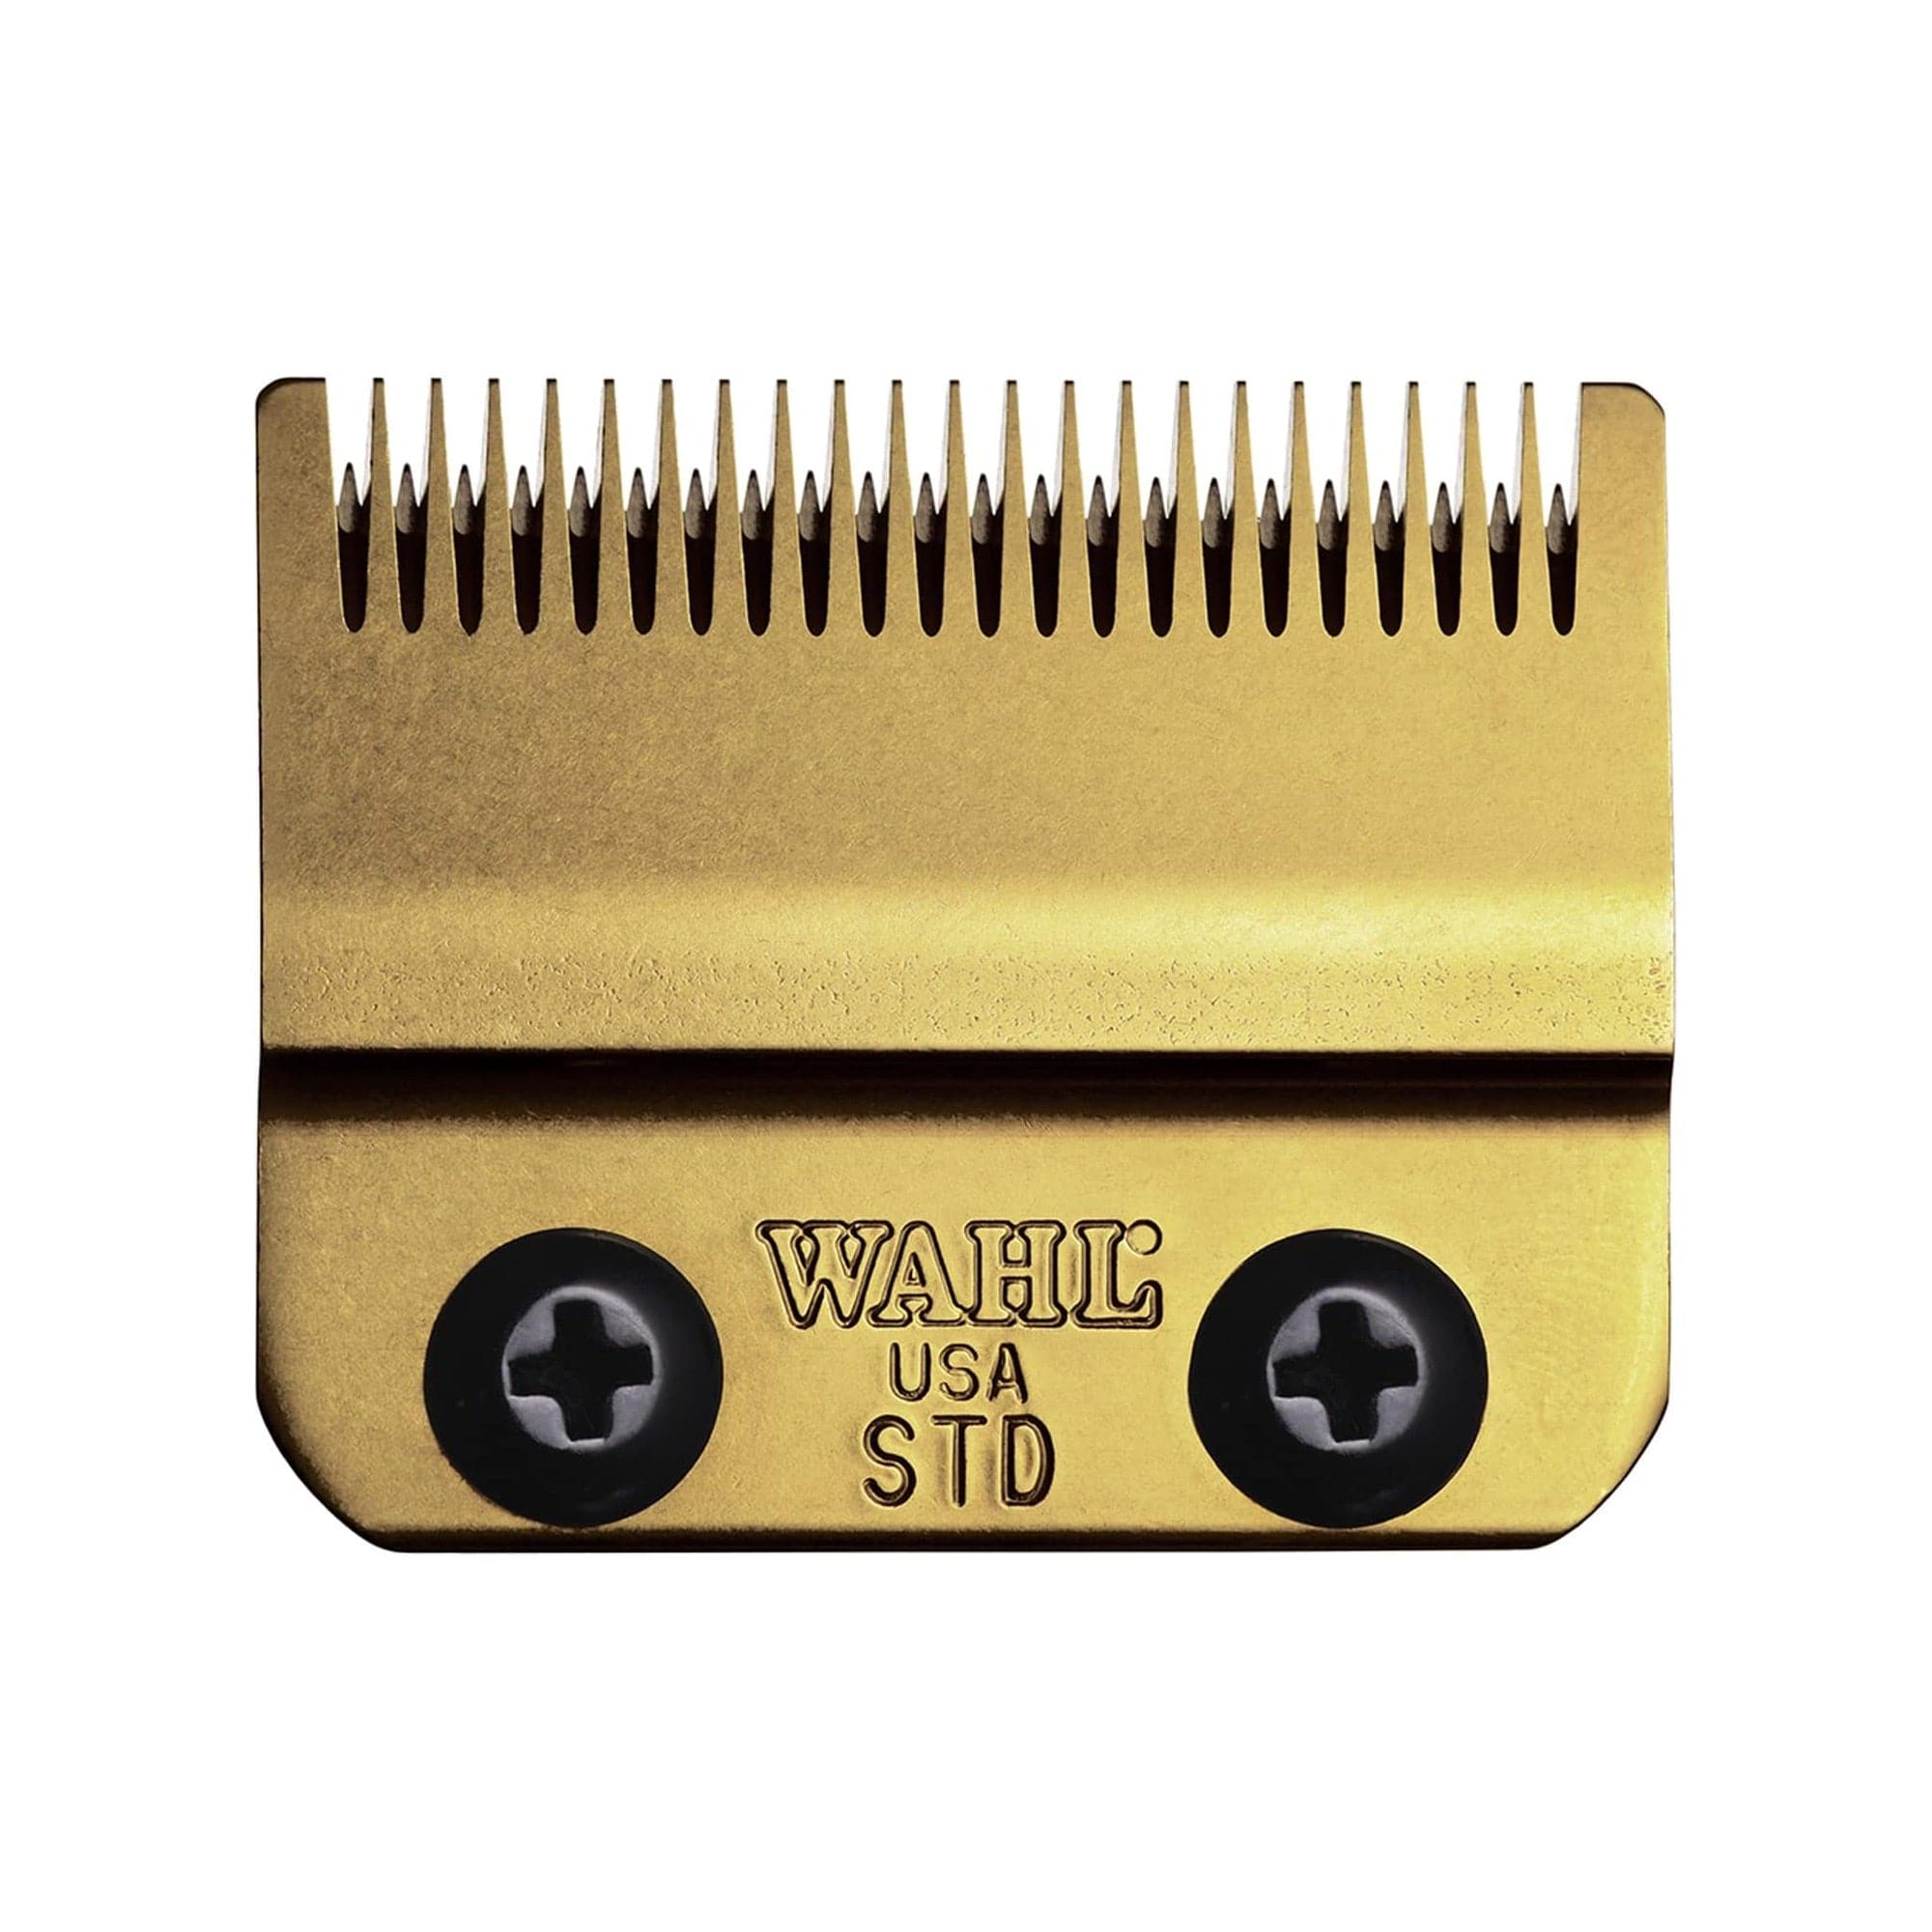 Wahl - Stagger Tooth Unique Blending Blade 2161-716